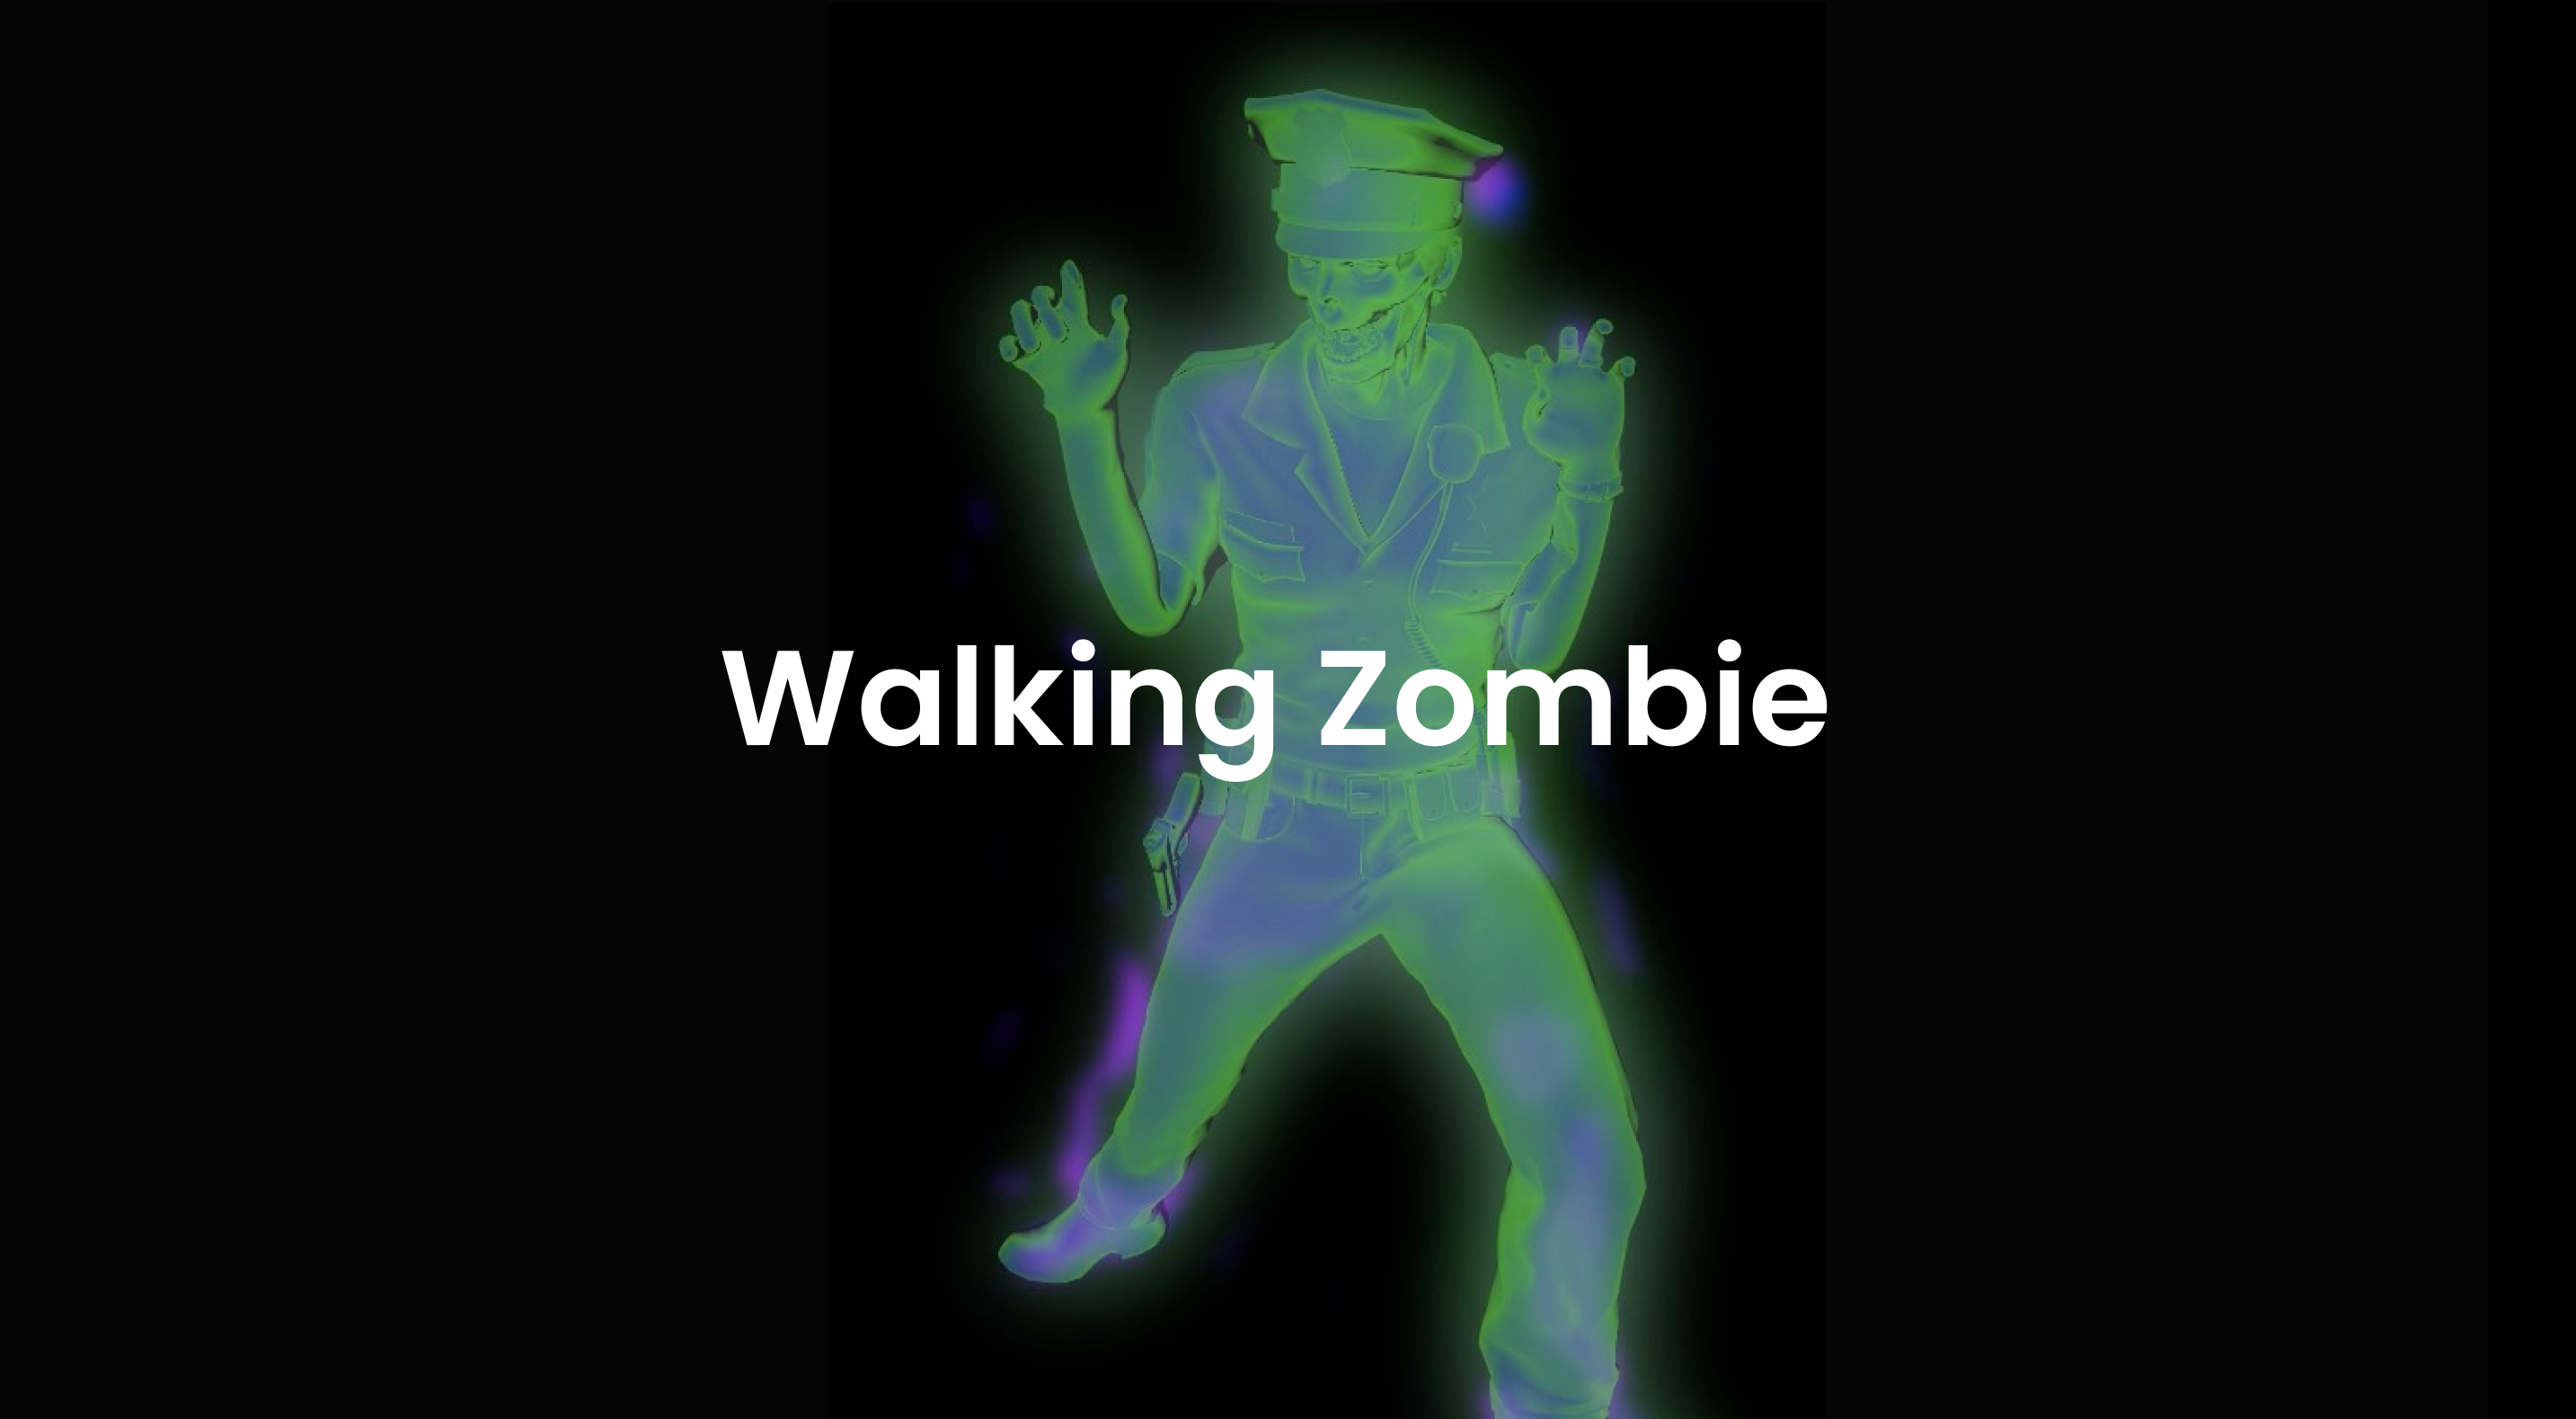 Walking Zombie, Halloween Digital Decorations for Haunted House